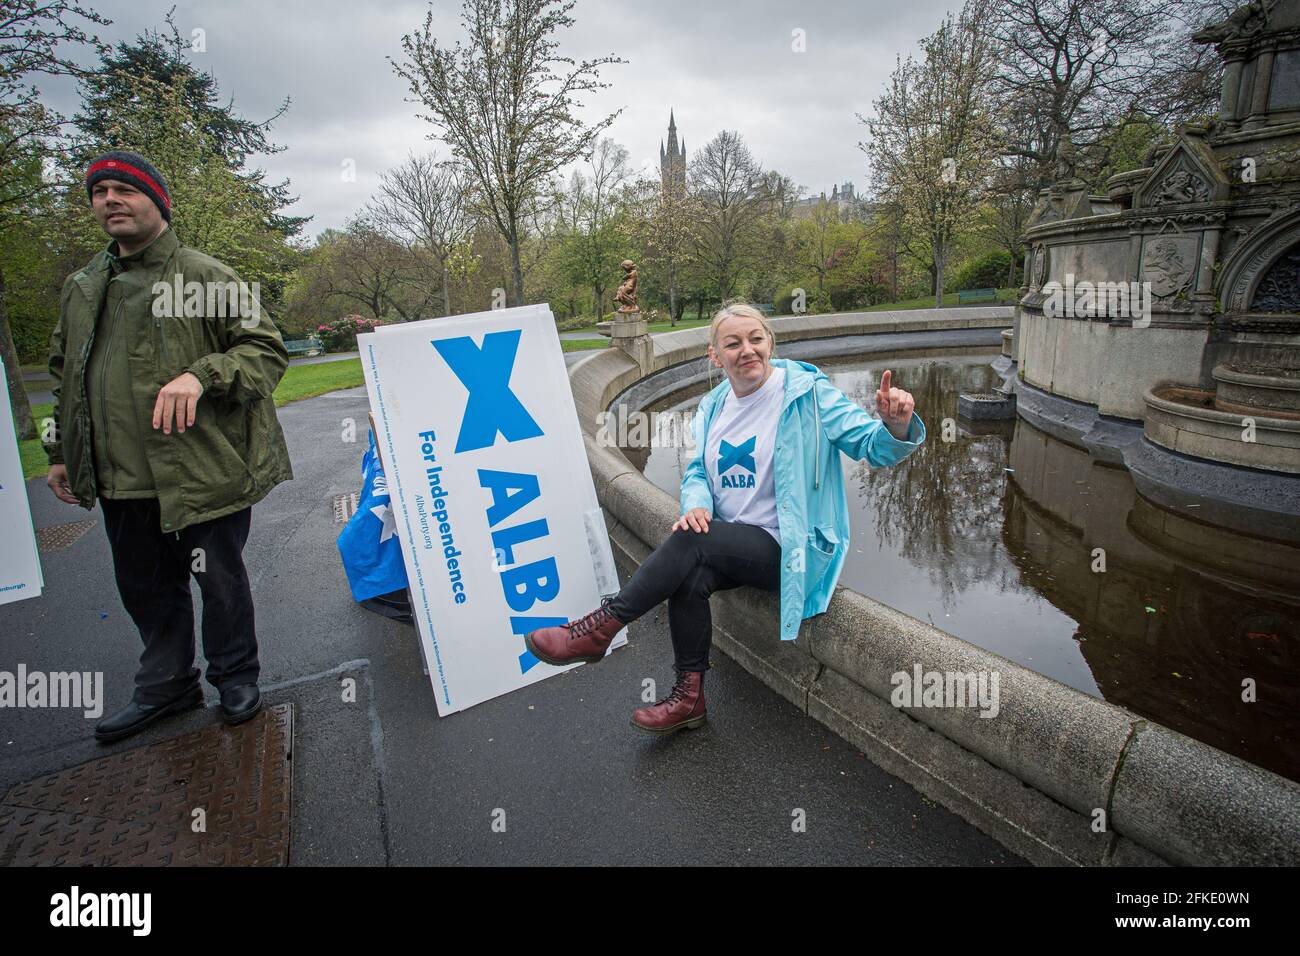 ALBA candidate Michelle Ferns campaigning at Kelvingrove Park with campaign materials collected by volunteers in Glasgow, Scotland. Stock Photo